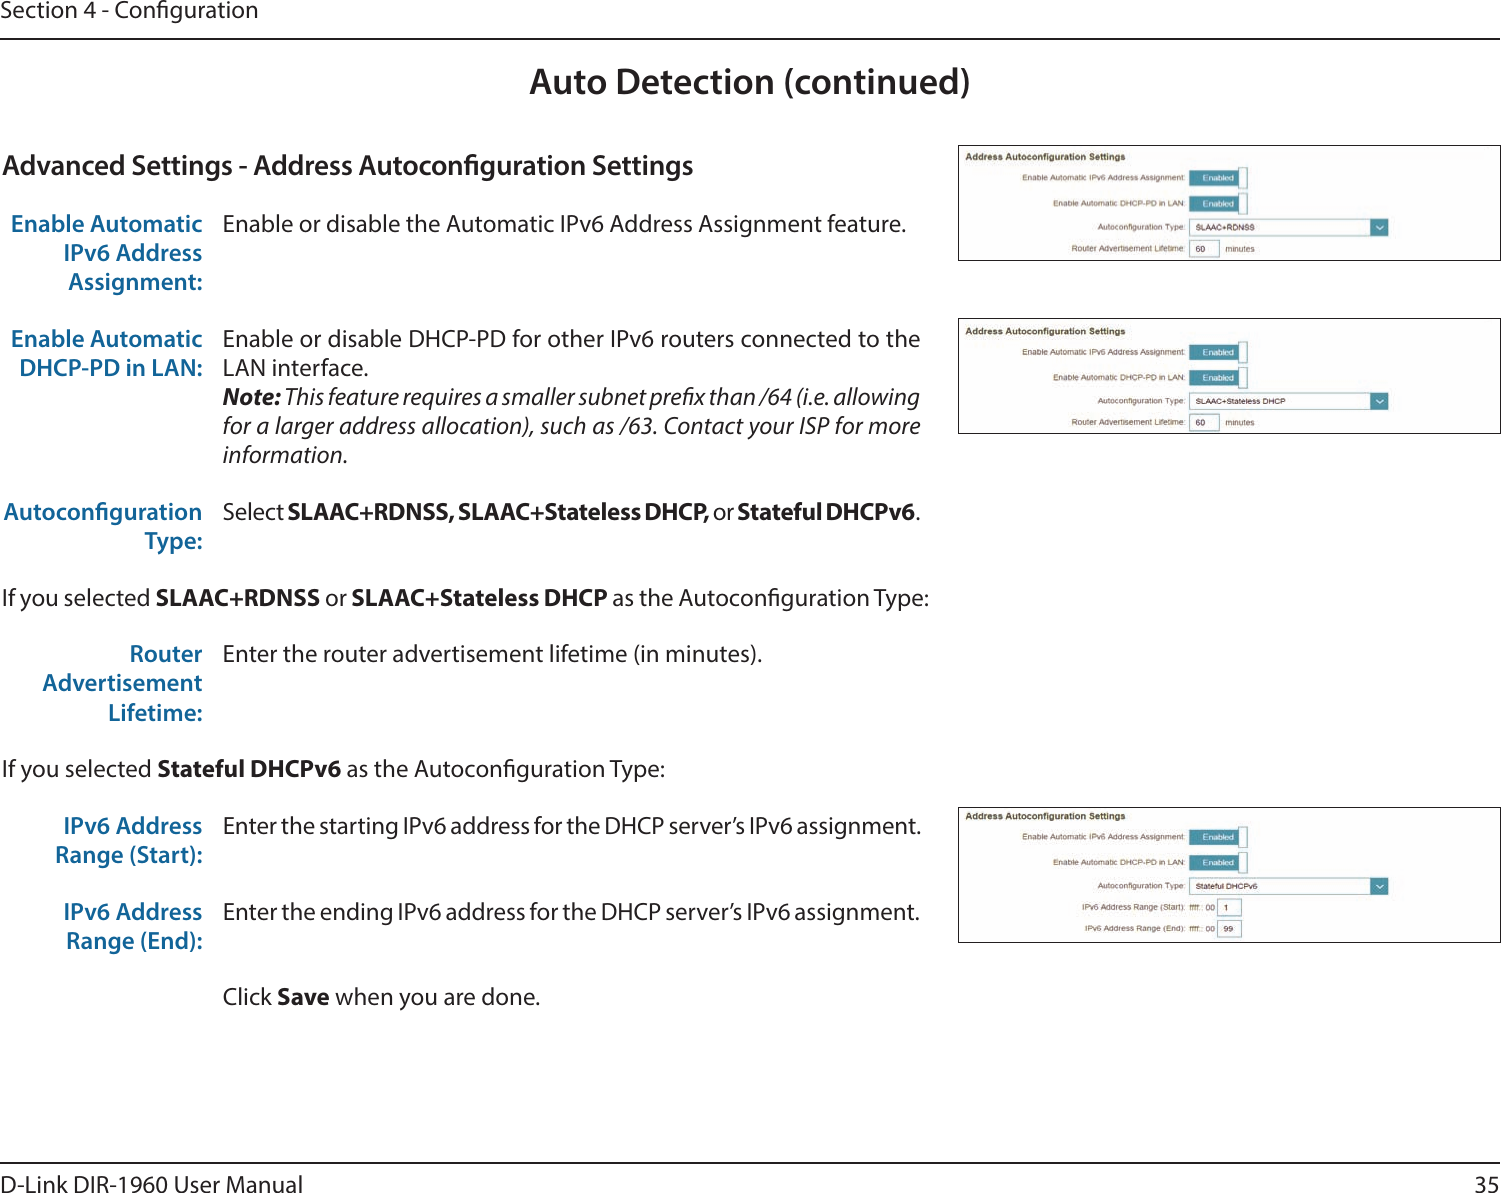 35D-Link DIR-1960 User ManualSection 4 - CongurationAuto Detection (continued)Advanced Settings - Address Autoconguration SettingsEnable Automatic IPv6 Address Assignment:Enable or disable the Automatic IPv6 Address Assignment feature.Enable Automatic DHCP-PD in LAN:Enable or disable DHCP-PD for other IPv6 routers connected to the LAN interface.Note: This feature requires a smaller subnet prex than /64 (i.e. allowing for a larger address allocation), such as /63. Contact your ISP for more information.Autoconguration Type:Select SLAAC+RDNSS, SLAAC+Stateless DHCP, or Stateful DHCPv6.If you selected SLAAC+RDNSS or SLAAC+Stateless DHCP as the Autoconguration Type:Router Advertisement Lifetime:Enter the router advertisement lifetime (in minutes).If you selected Stateful DHCPv6 as the Autoconguration Type:IPv6 Address Range (Start):Enter the starting IPv6 address for the DHCP server’s IPv6 assignment.IPv6 Address Range (End):Enter the ending IPv6 address for the DHCP server’s IPv6 assignment.Click Save when you are done.